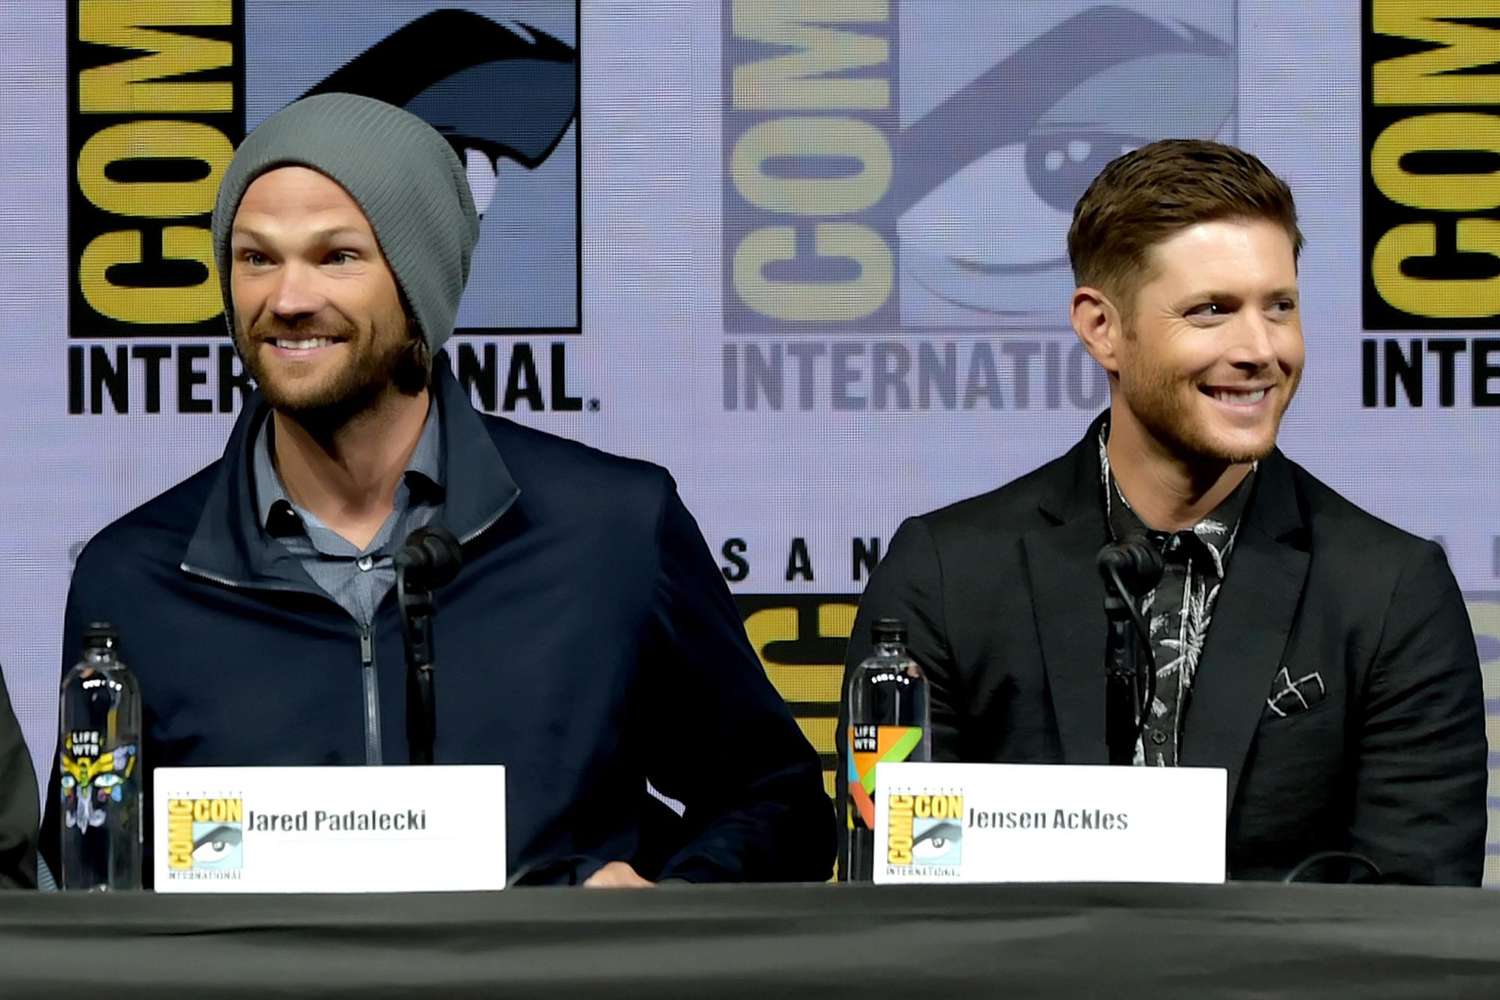 Comic-Con International 2018 - "Supernatural" Special Video Presentation and Q&A